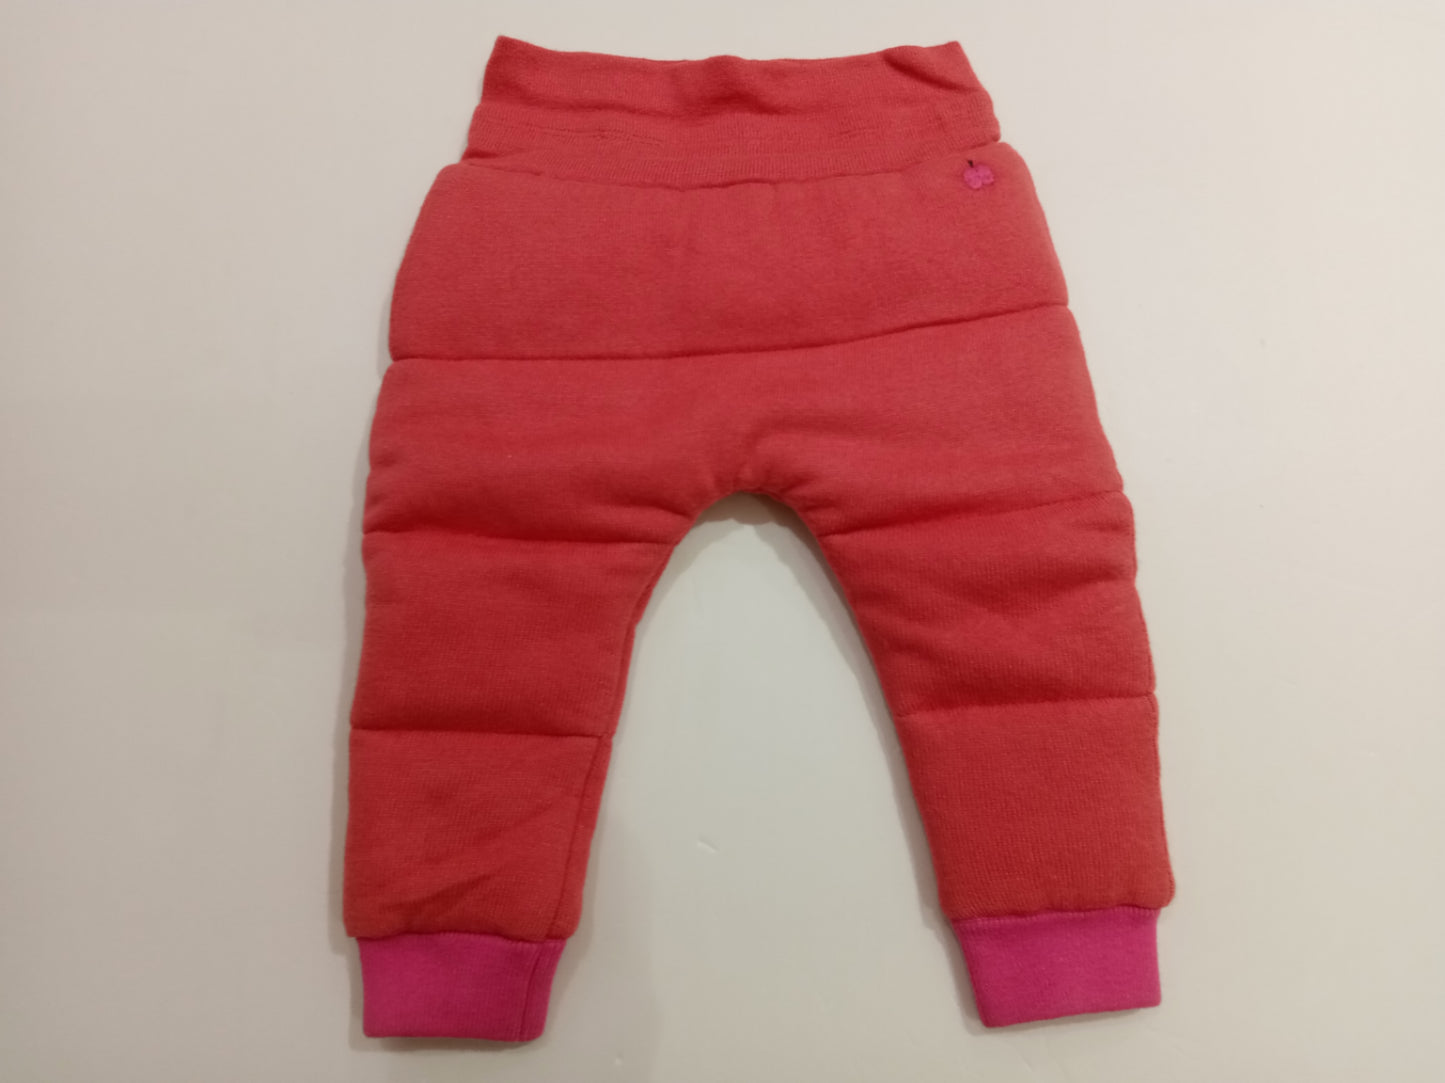 PANTS - BABY - 3 COLOR (MUSTARD/PINK/TEAL) - BBA15 052